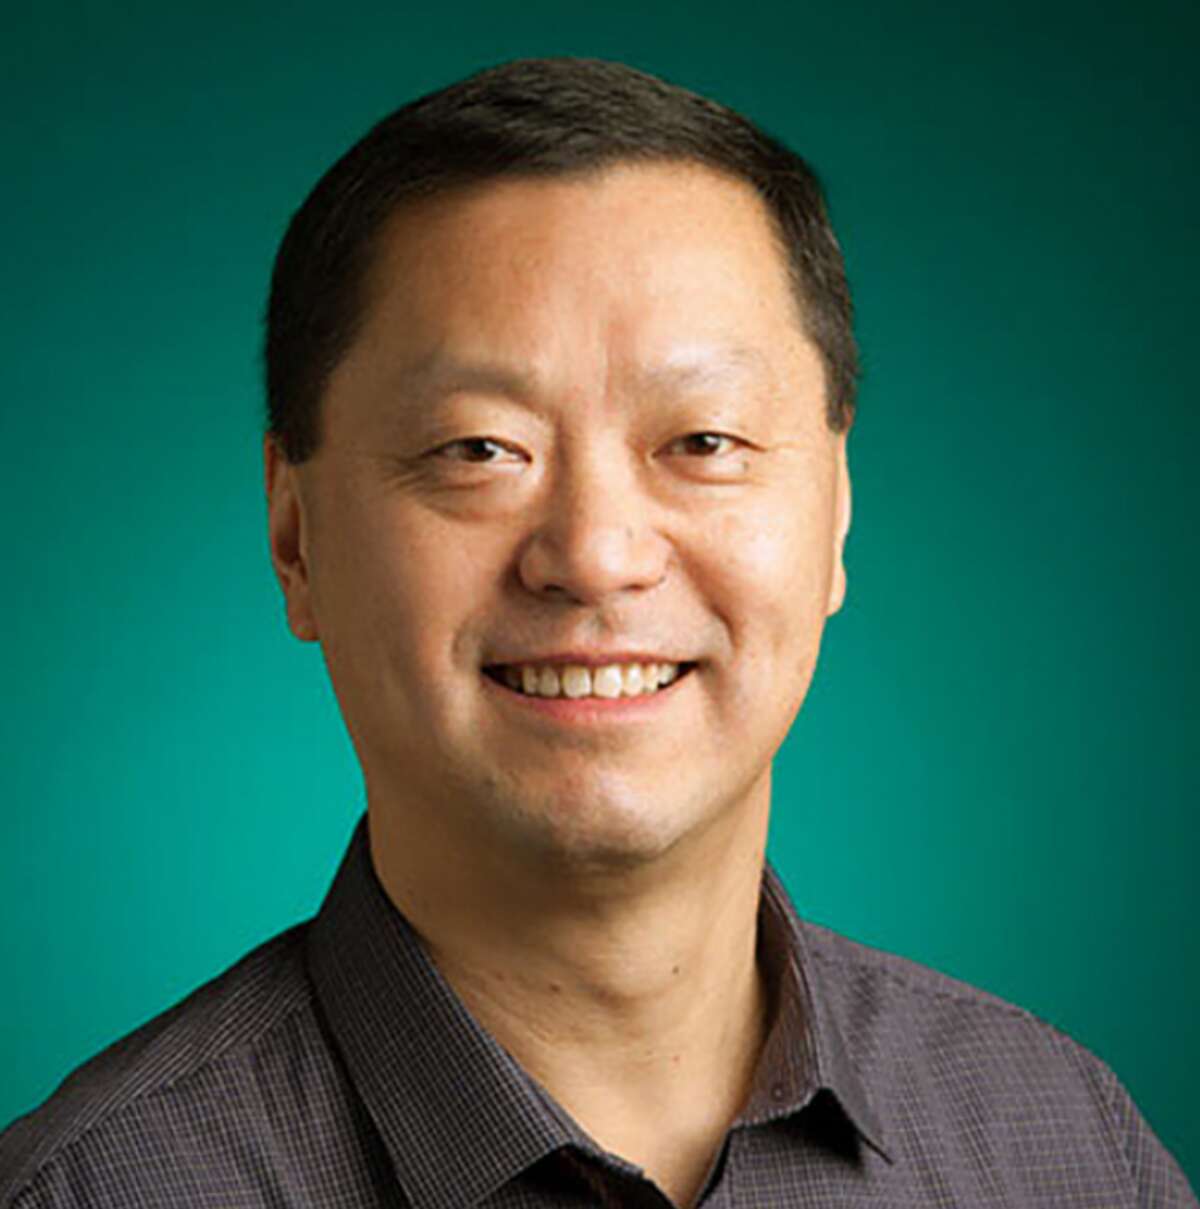 SIUE will host a virtual presentation titled AI and Machine Learning for Businesses and Education at 4:30 p.m. in the Morris University Center Thursday, March 16 featuring speaker Bill Luan.